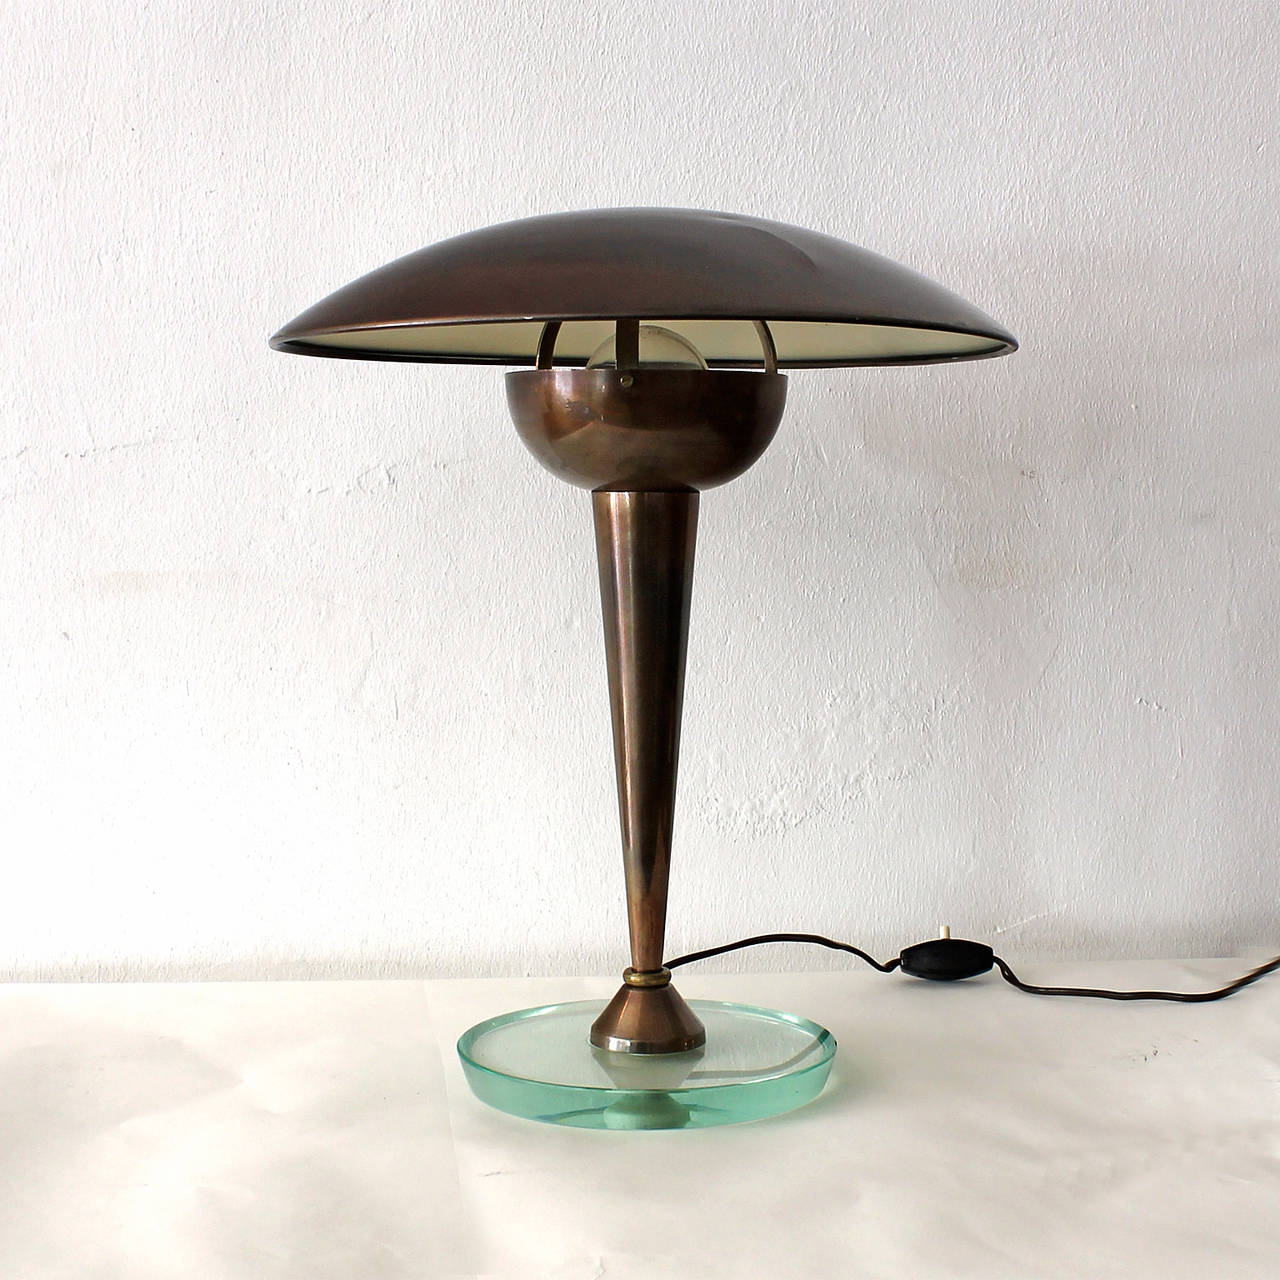 Art Deco desk lamp, brass with original oxidation, thick glass base, pivoting lampshade.
Manufacturer: Stilnovo
Italy c. 1930